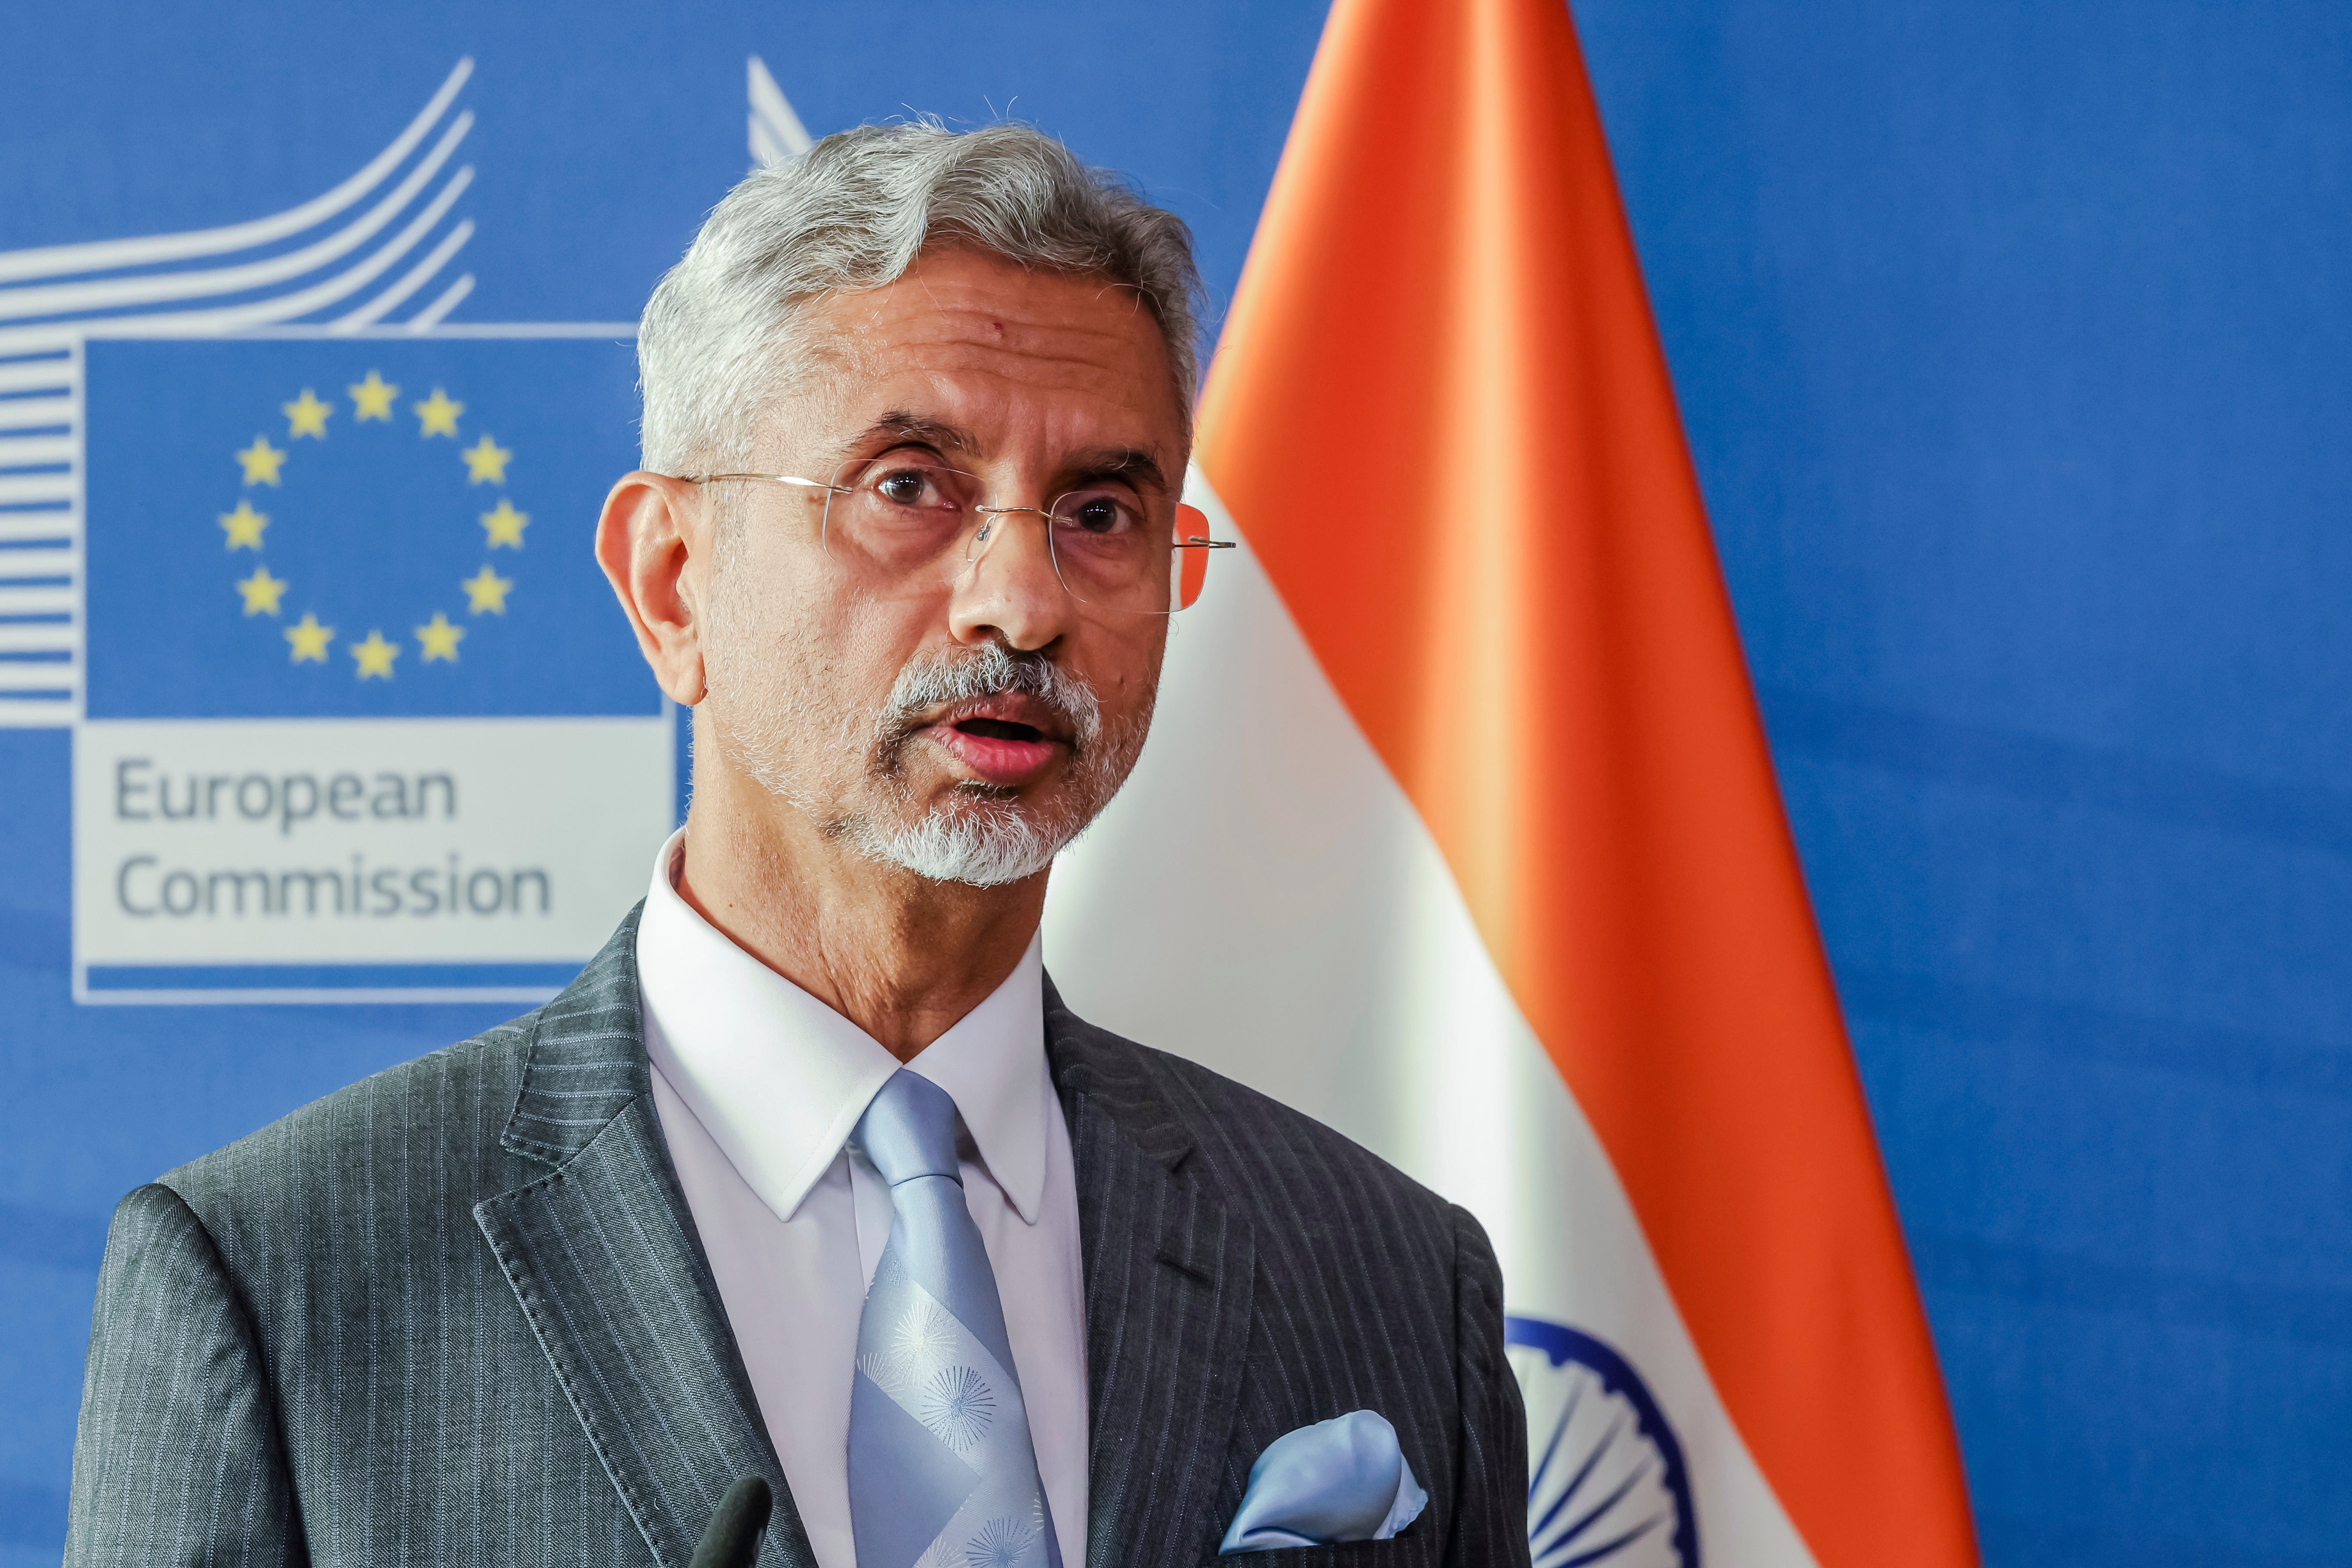 India's Minister for External Affairs S. Jaishankar addresses the media during a press conference on the EU-India Trade and Technology Council at EU headquarters in Brussels, Belgium